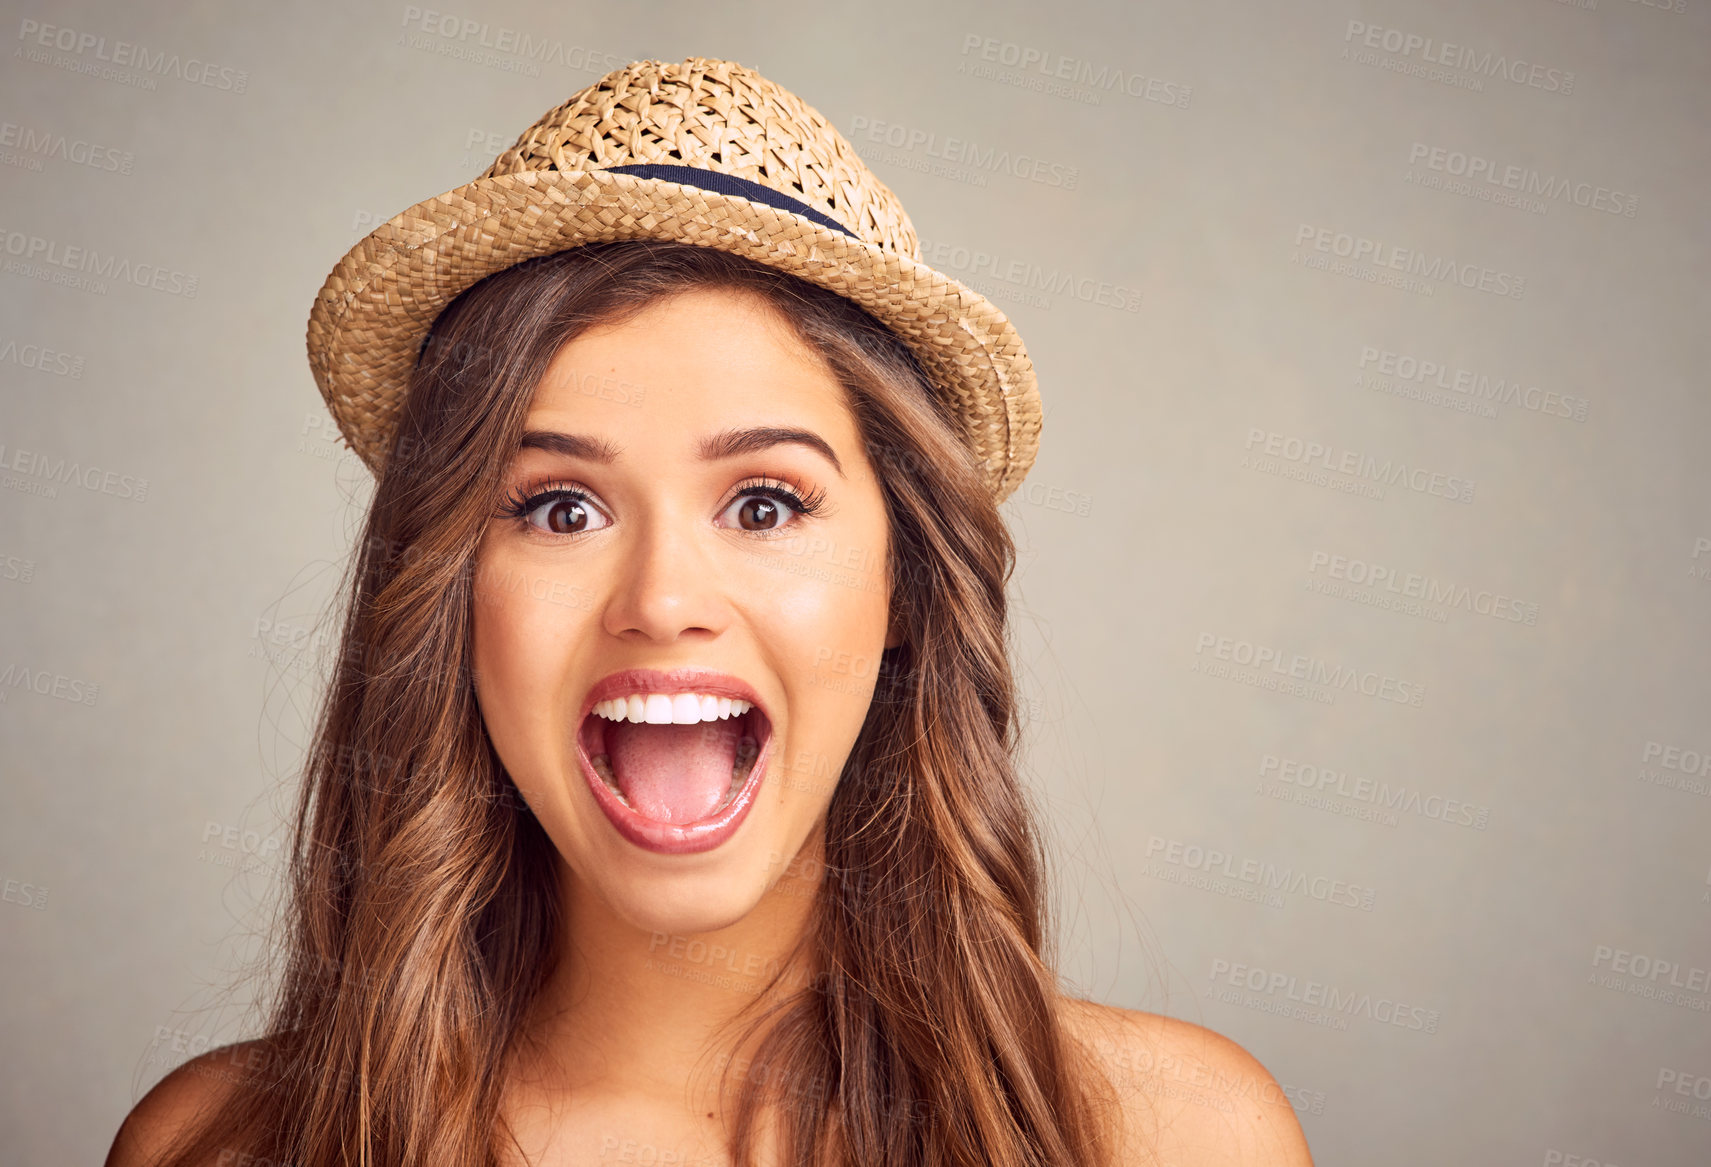 Buy stock photo Studio portrait of an attractive young woman looking excited against a gray background